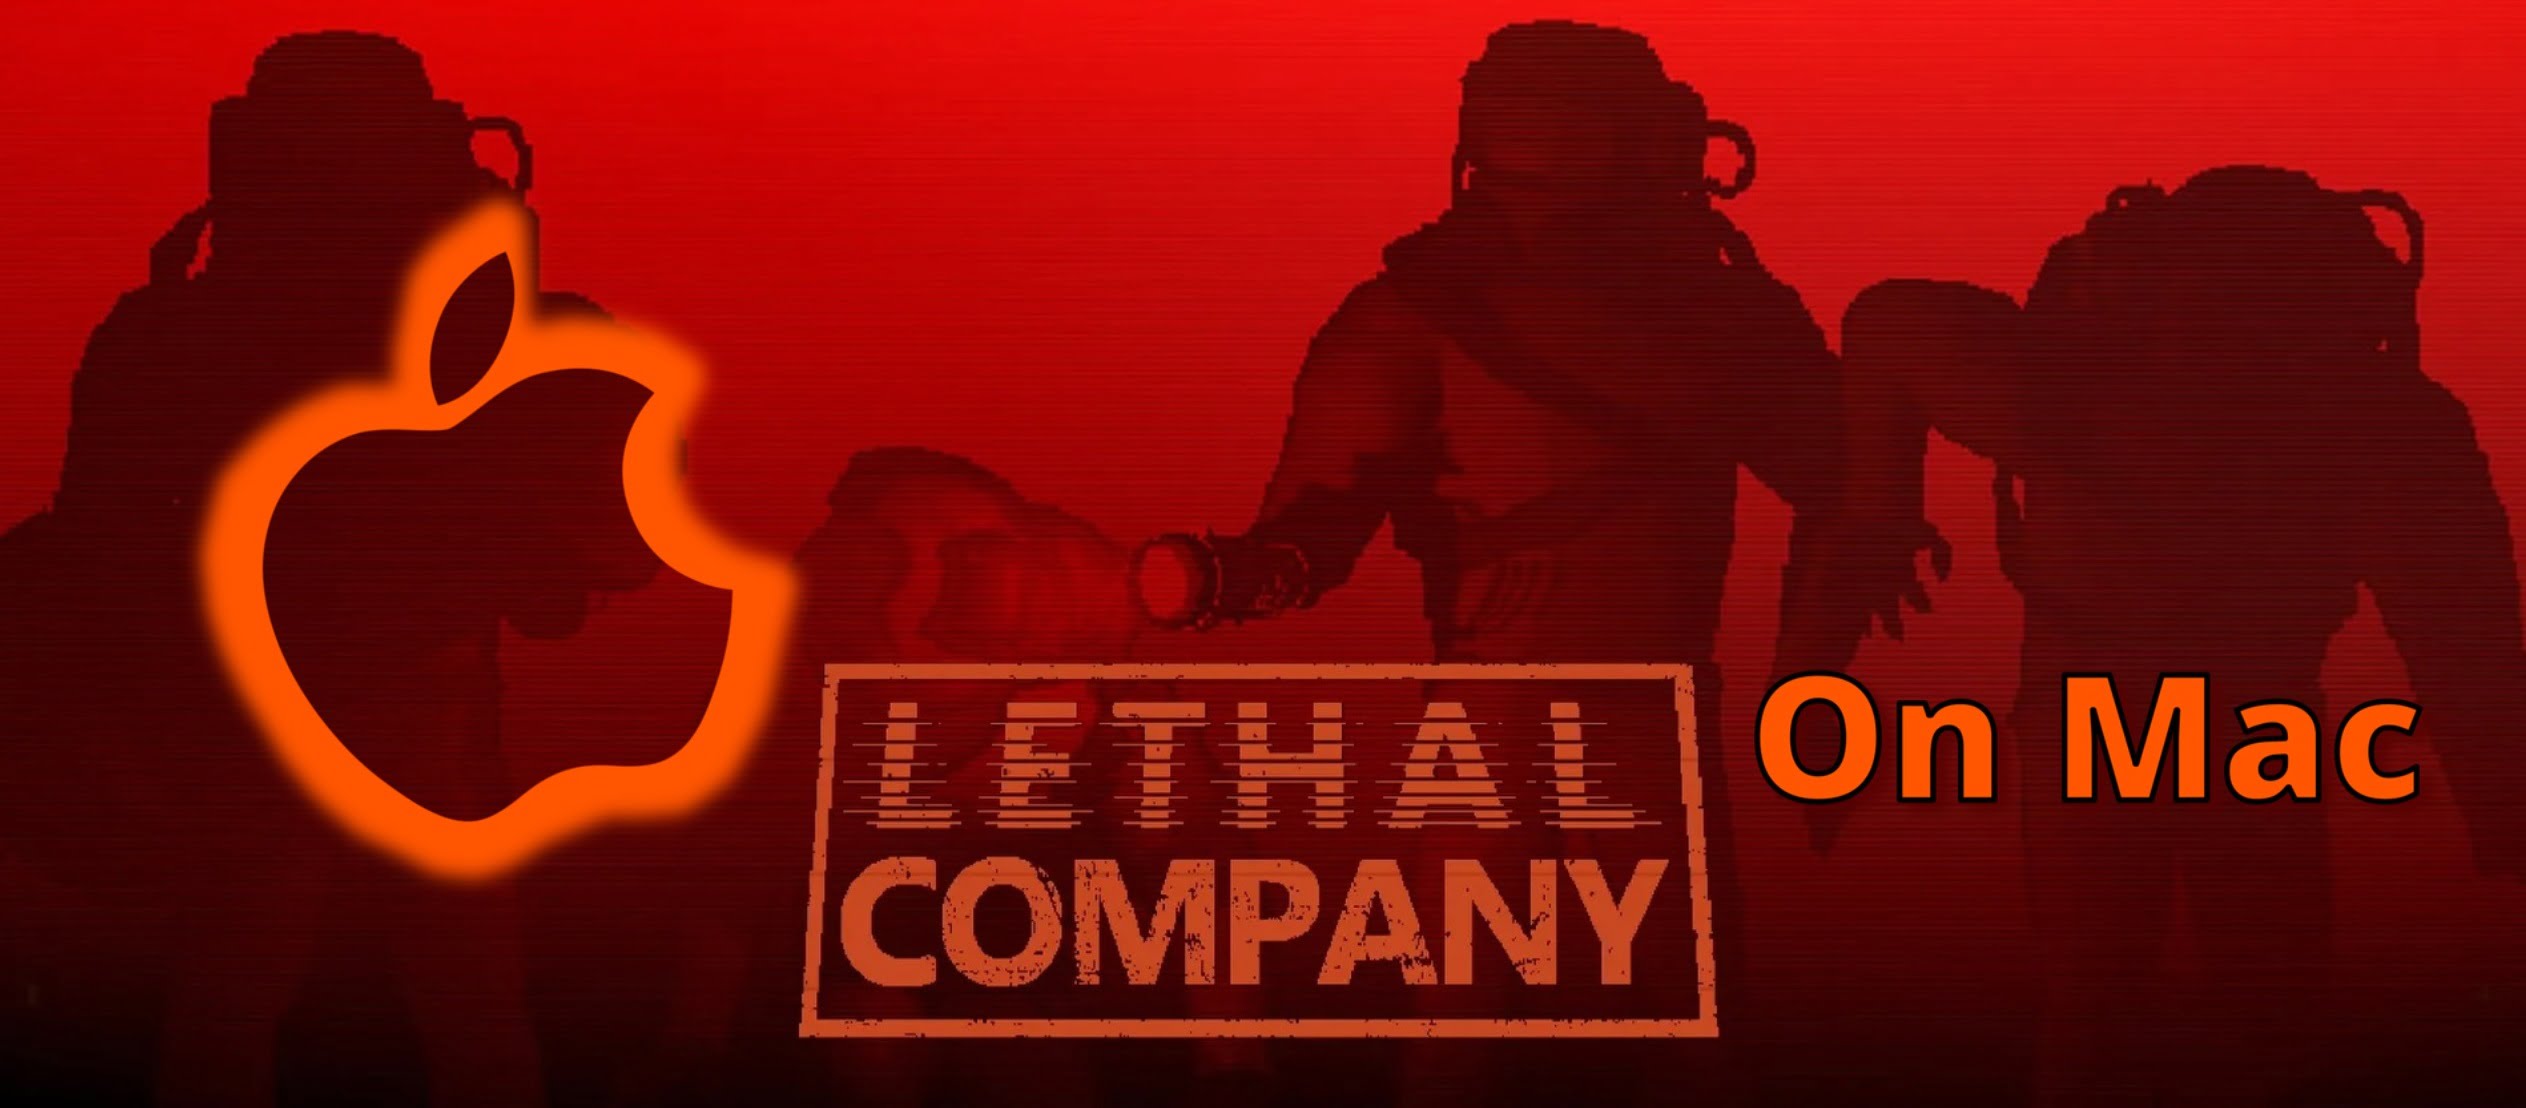 Lethal Company on Mac: Working Methods and Performance